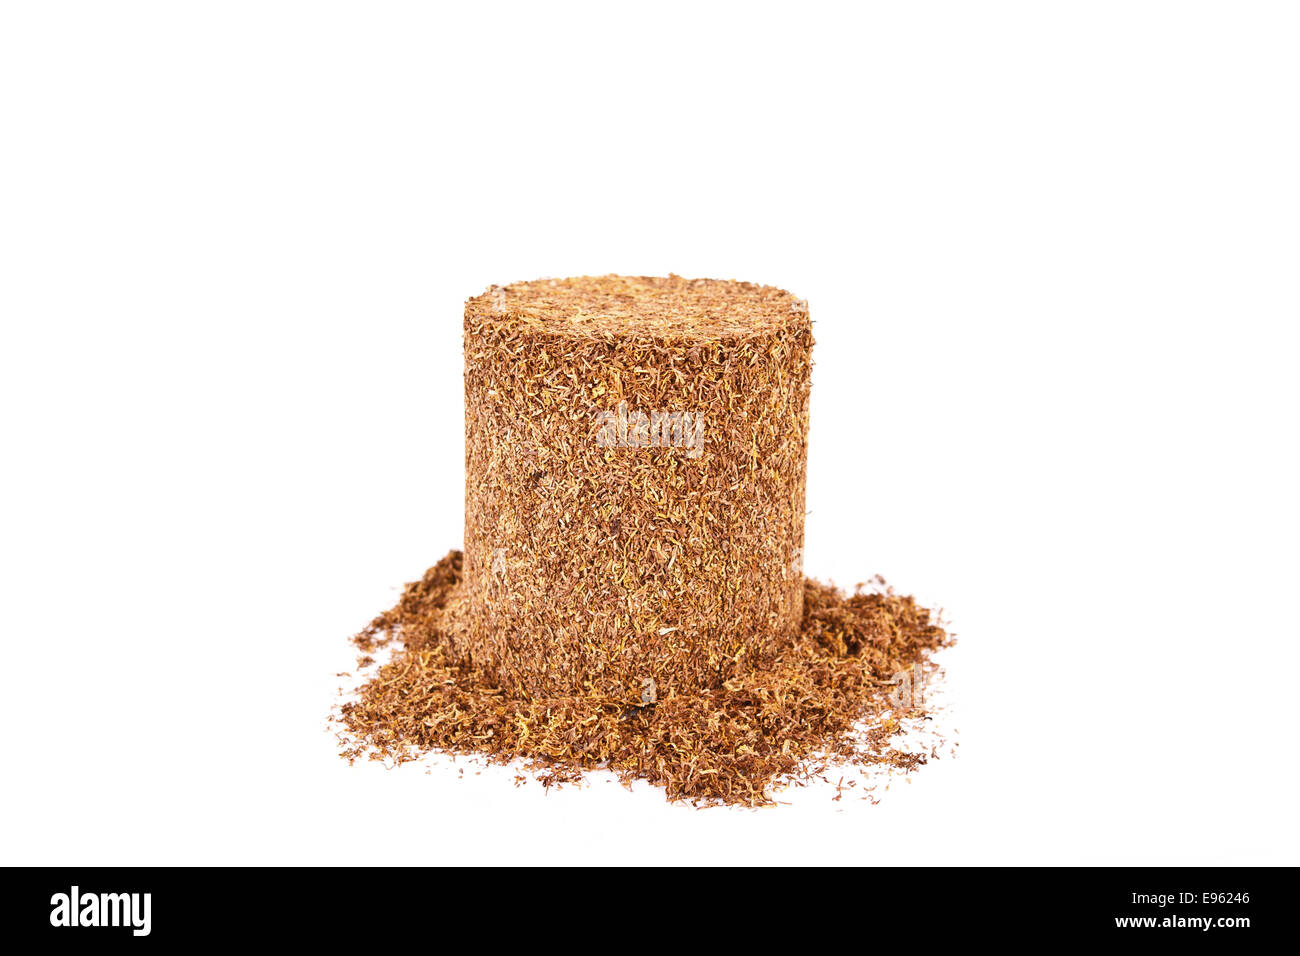 Pile of shredded cigarette tobacco isolated on white background, lung cancer concept Stock Photo